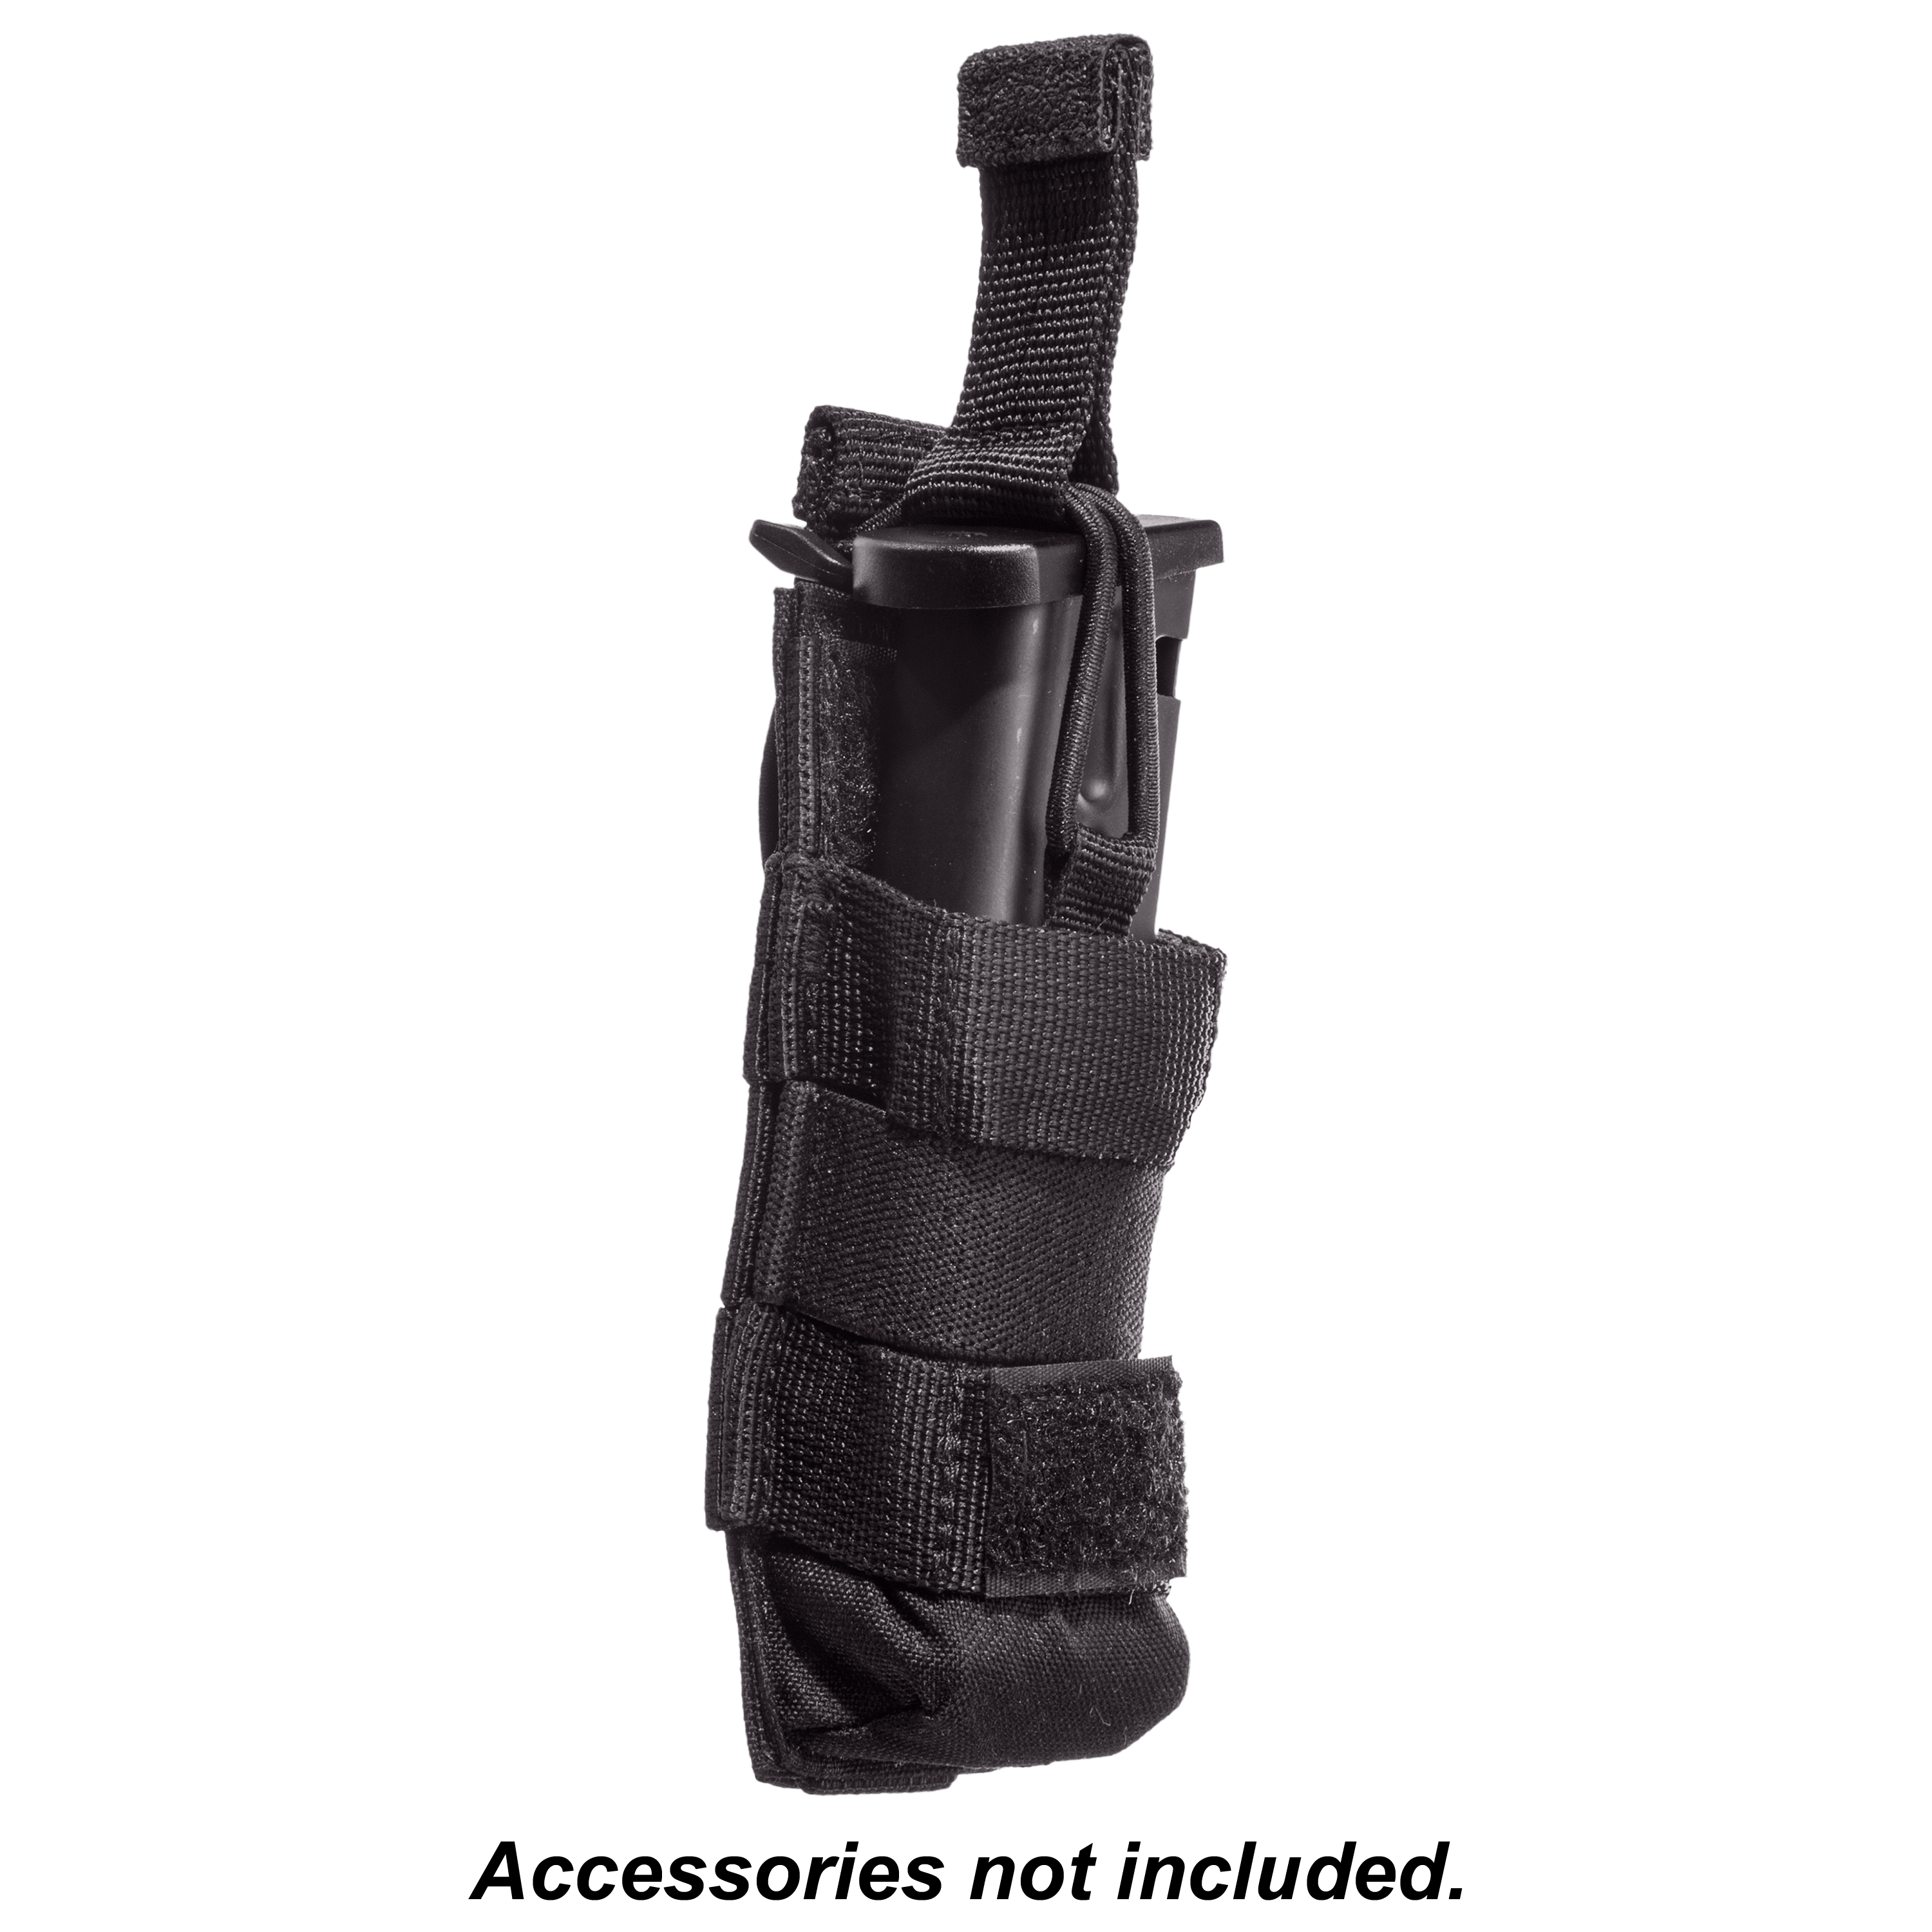 5.11 Tactical Single Magazine Pouch Pistol Bungee/Cover